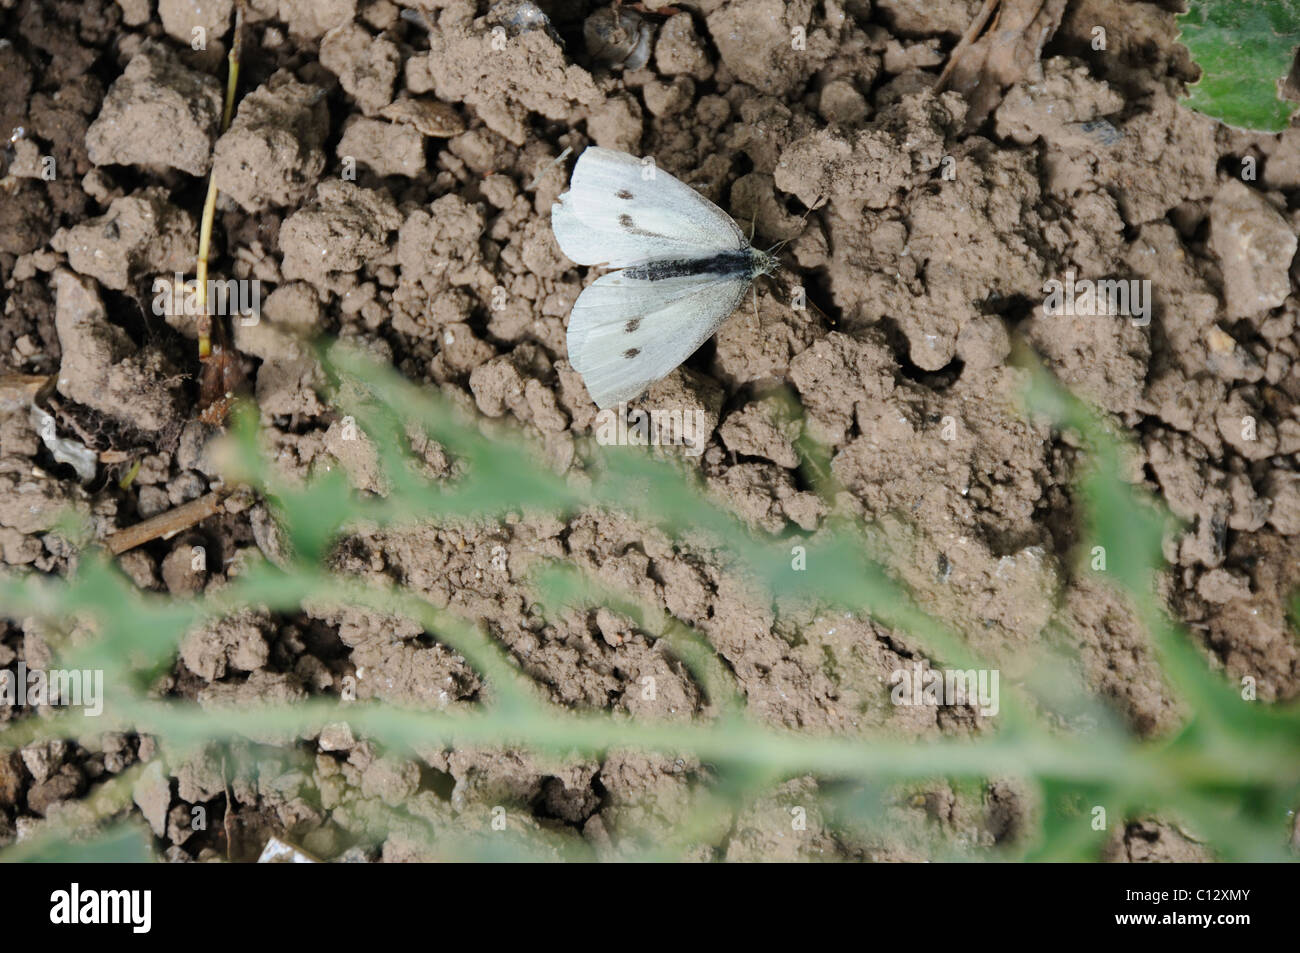 Cabbage white butterfly next to the damage the catepilla can cause to a crop Stock Photo